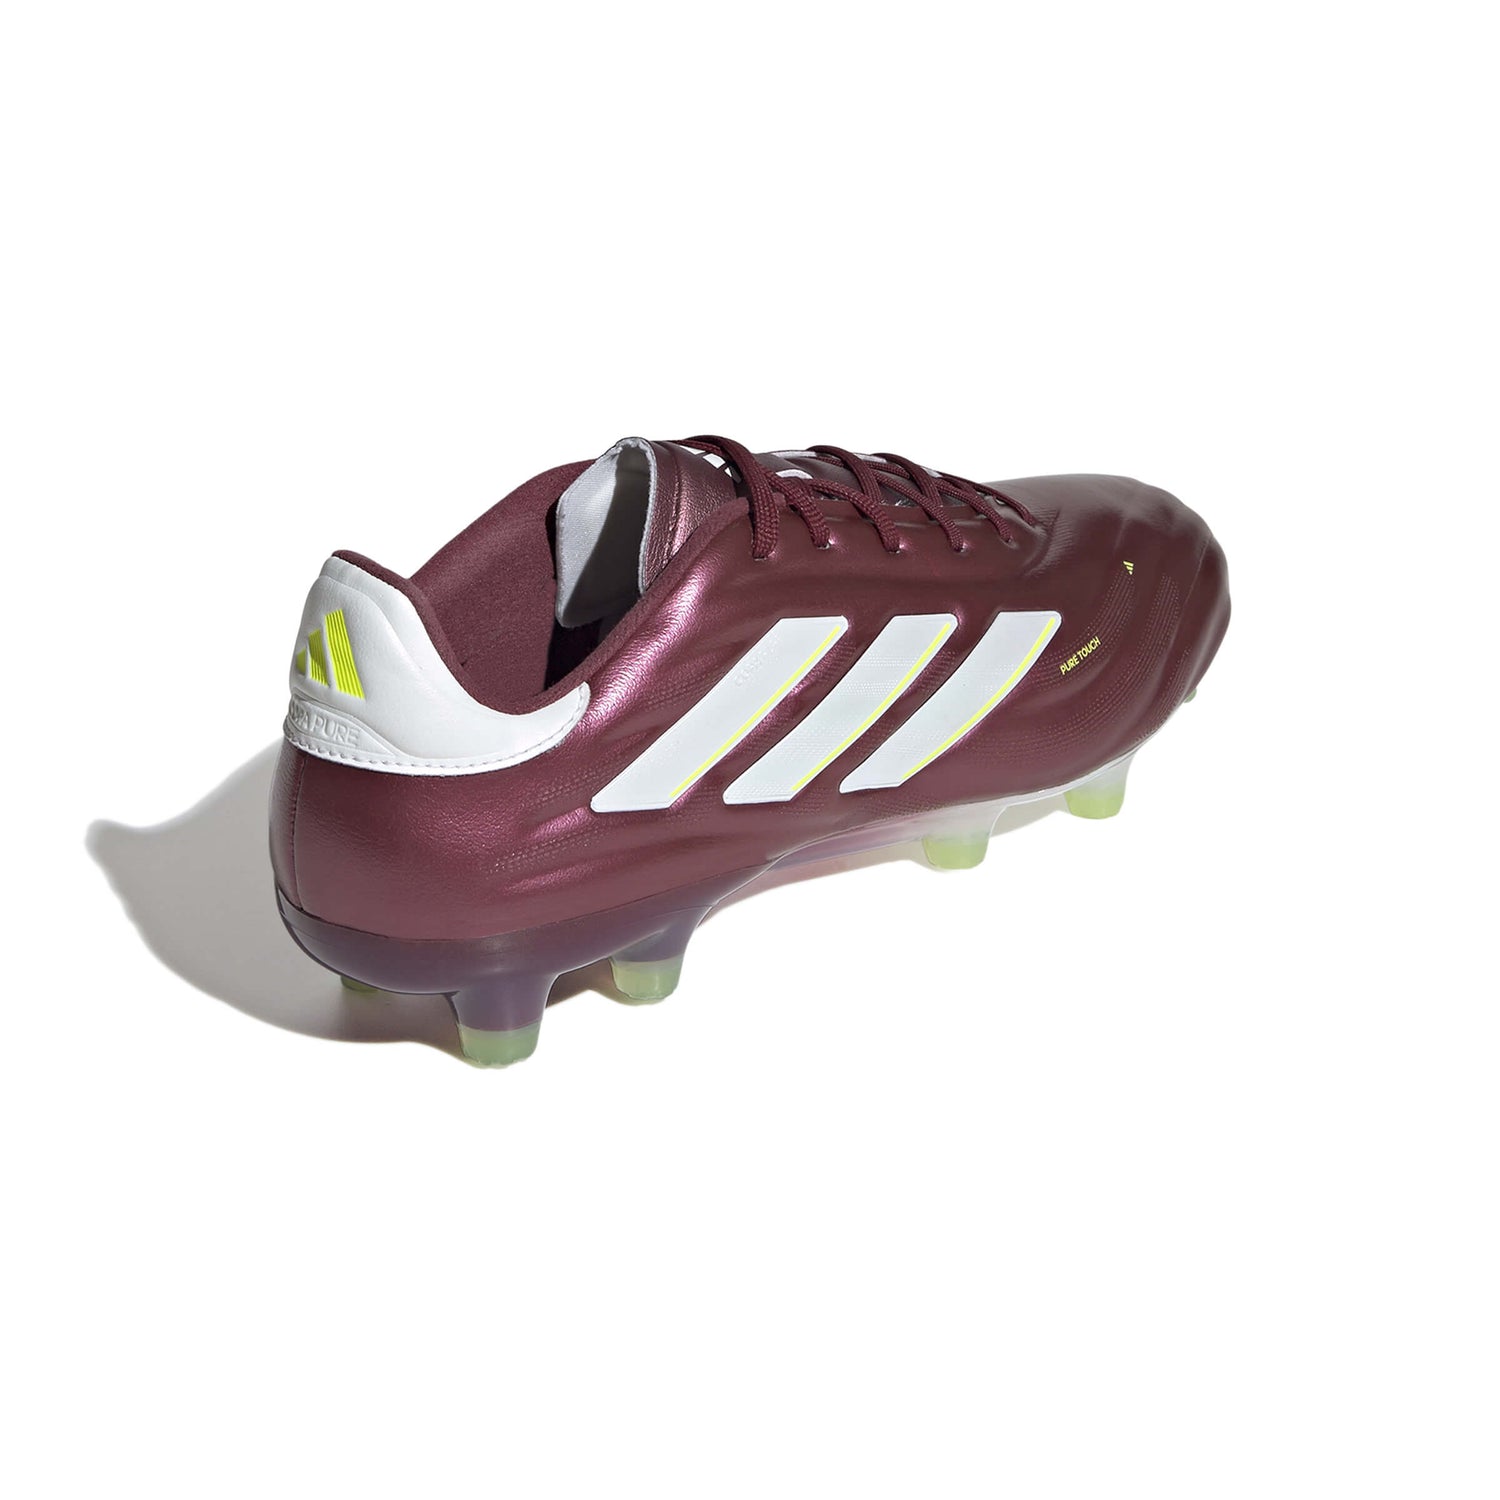 adidas Copa Pure 2 Elite FG - Energy Citrus Pack (SP24) (Lateral - Back)